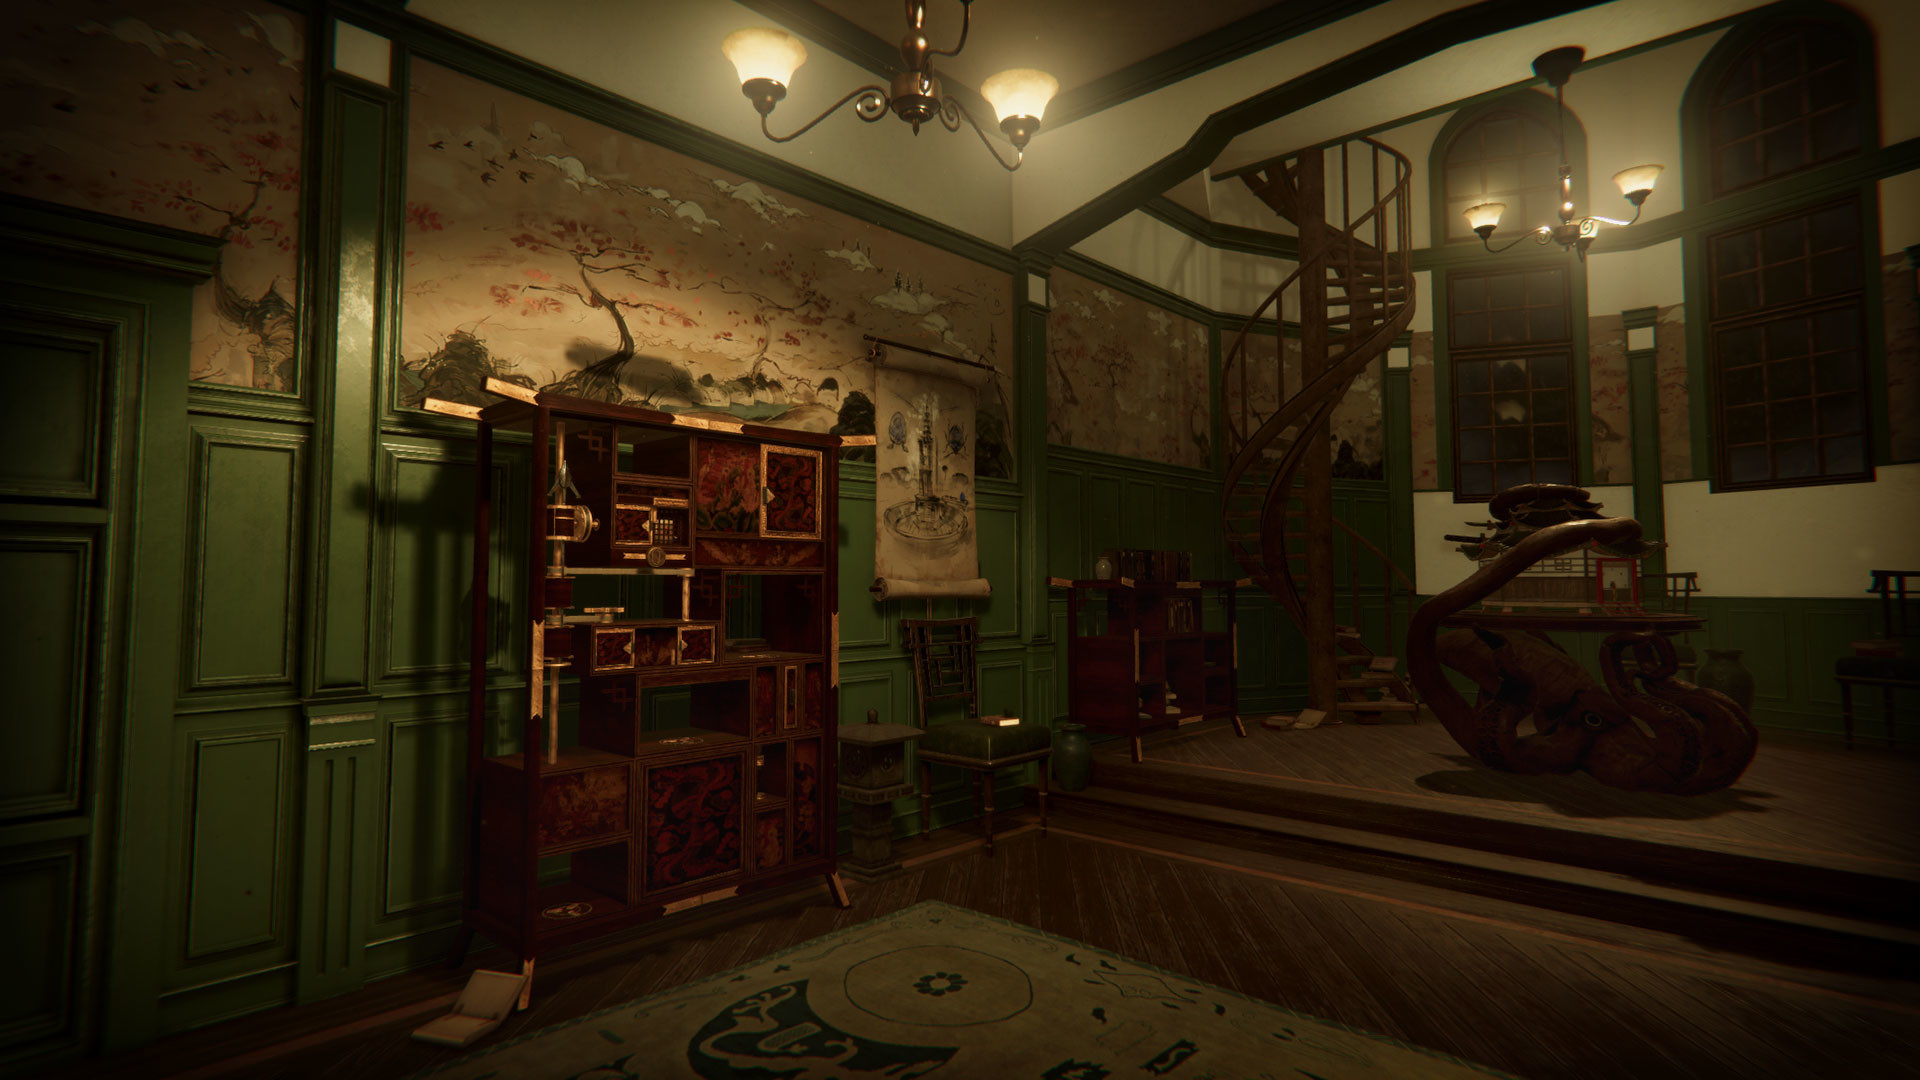 the room 4 old sins download